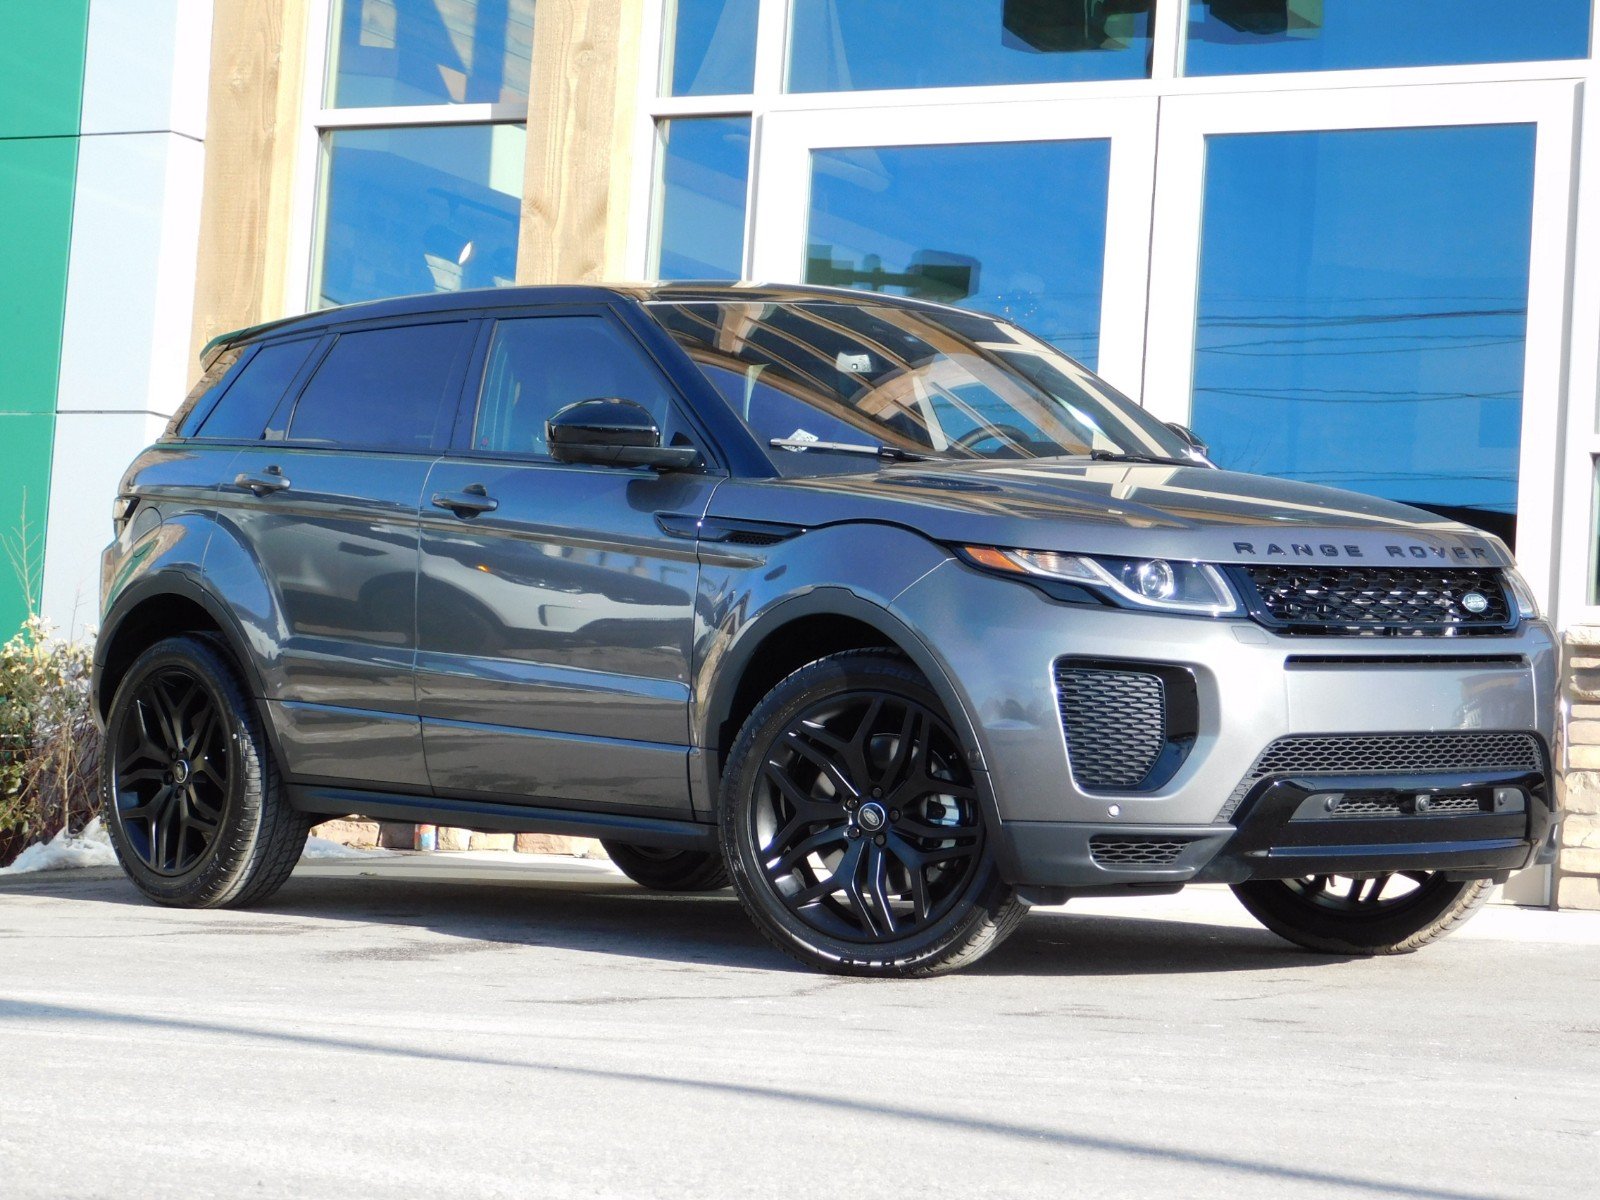 New 2019 Land Rover Range Rover Evoque Hse Dynamic Sport Utility